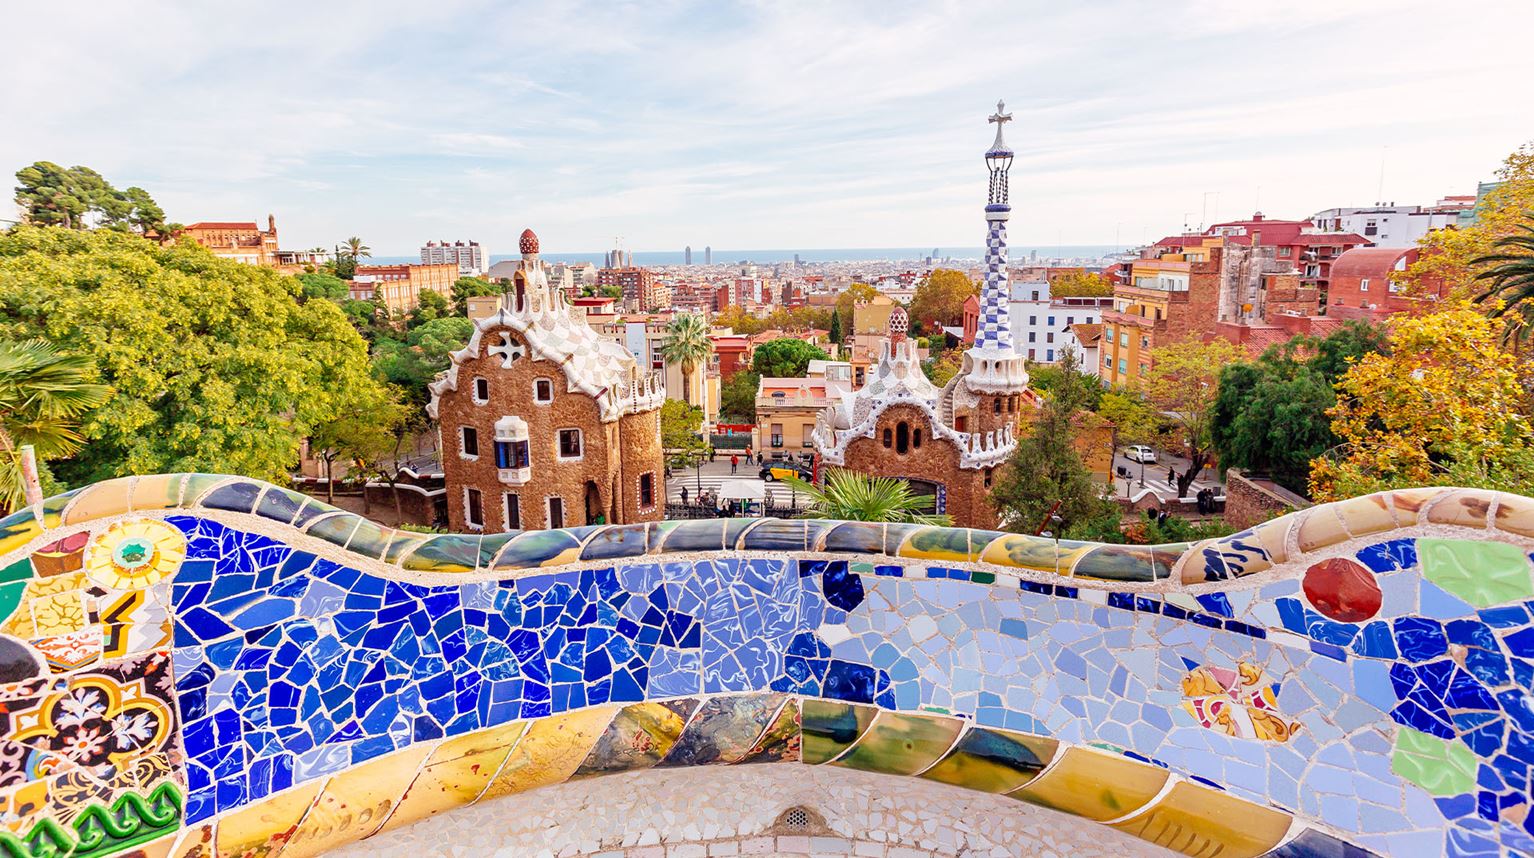 Barcelona skyline with colorful buildings at Guell Park 